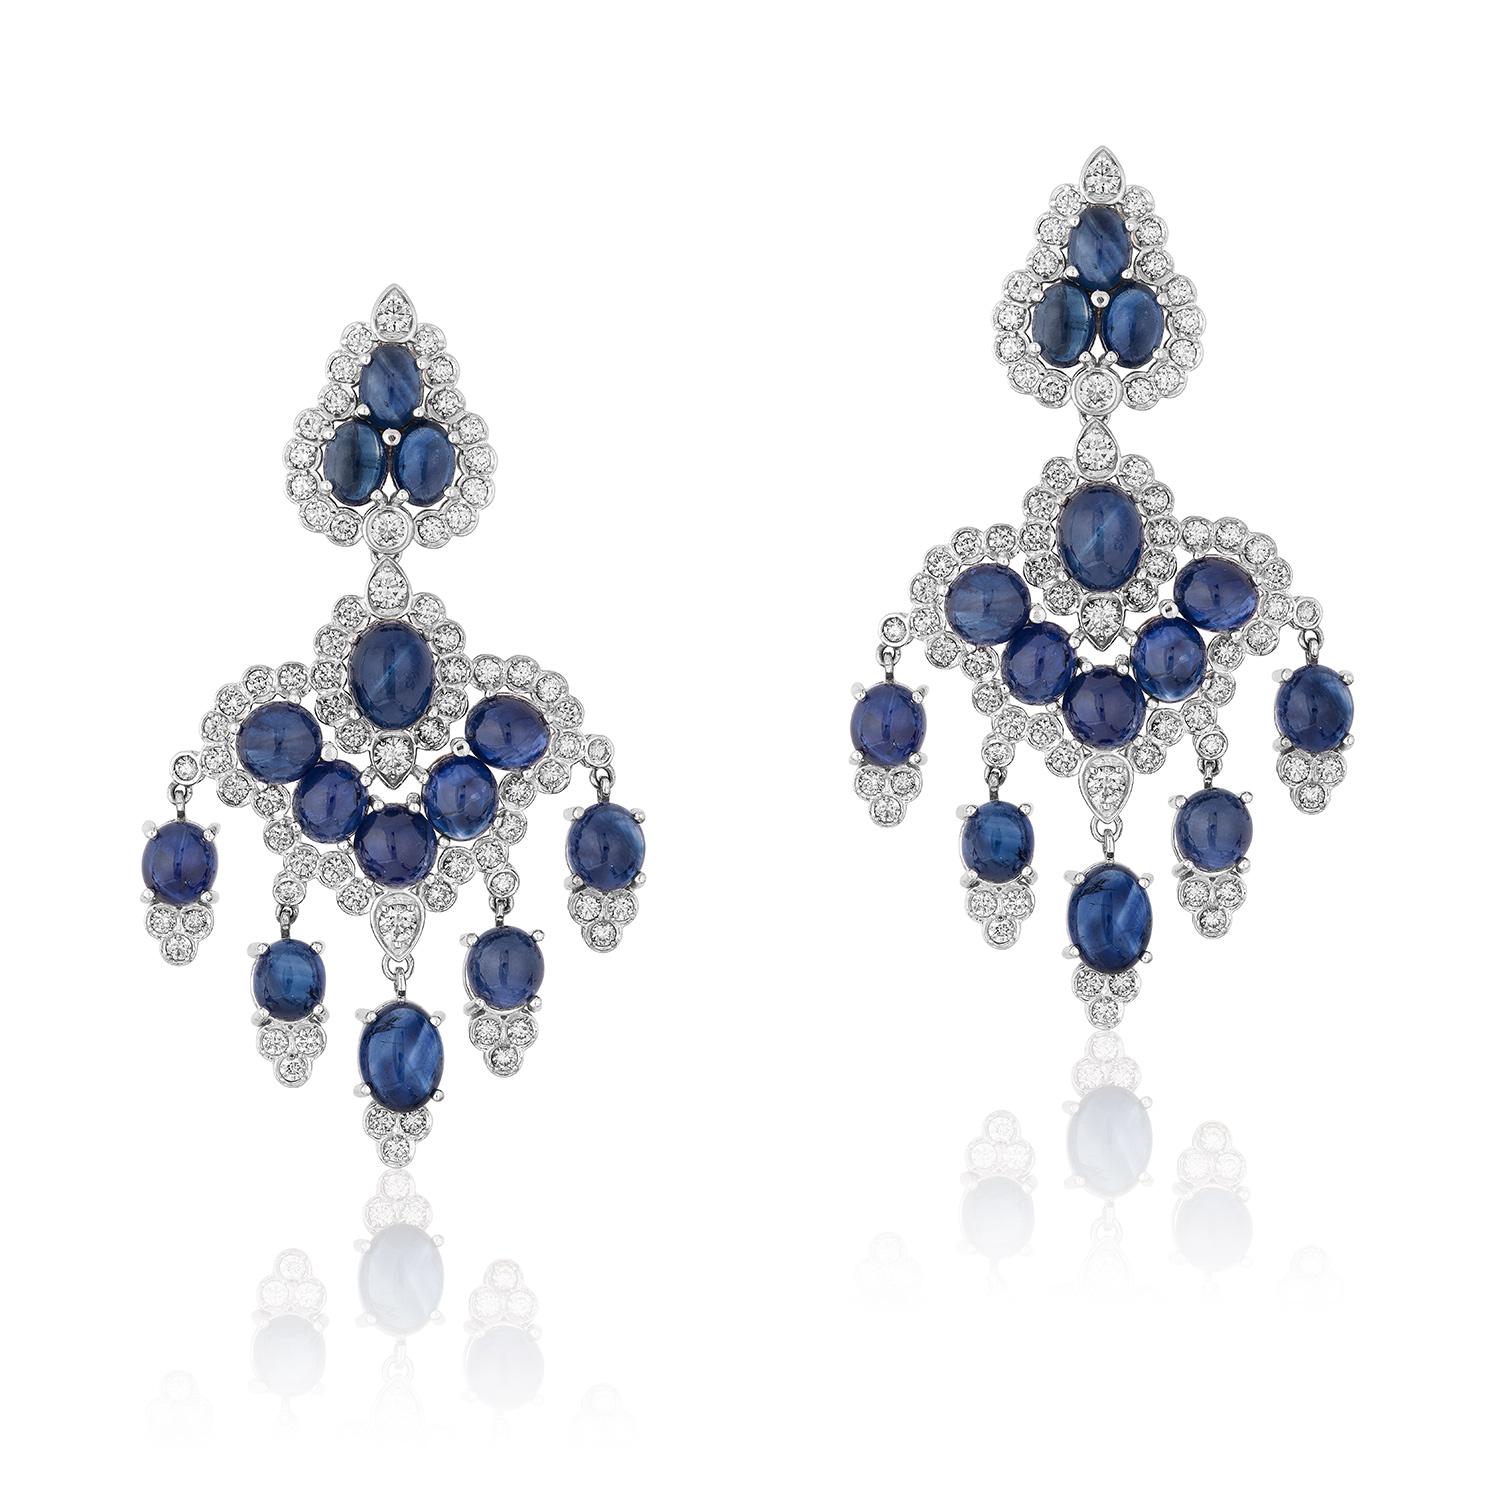 Mixed Cut Andreoli Cabochon Blue Sapphire Diamond 18 Karat White Gold Earrings For Sale